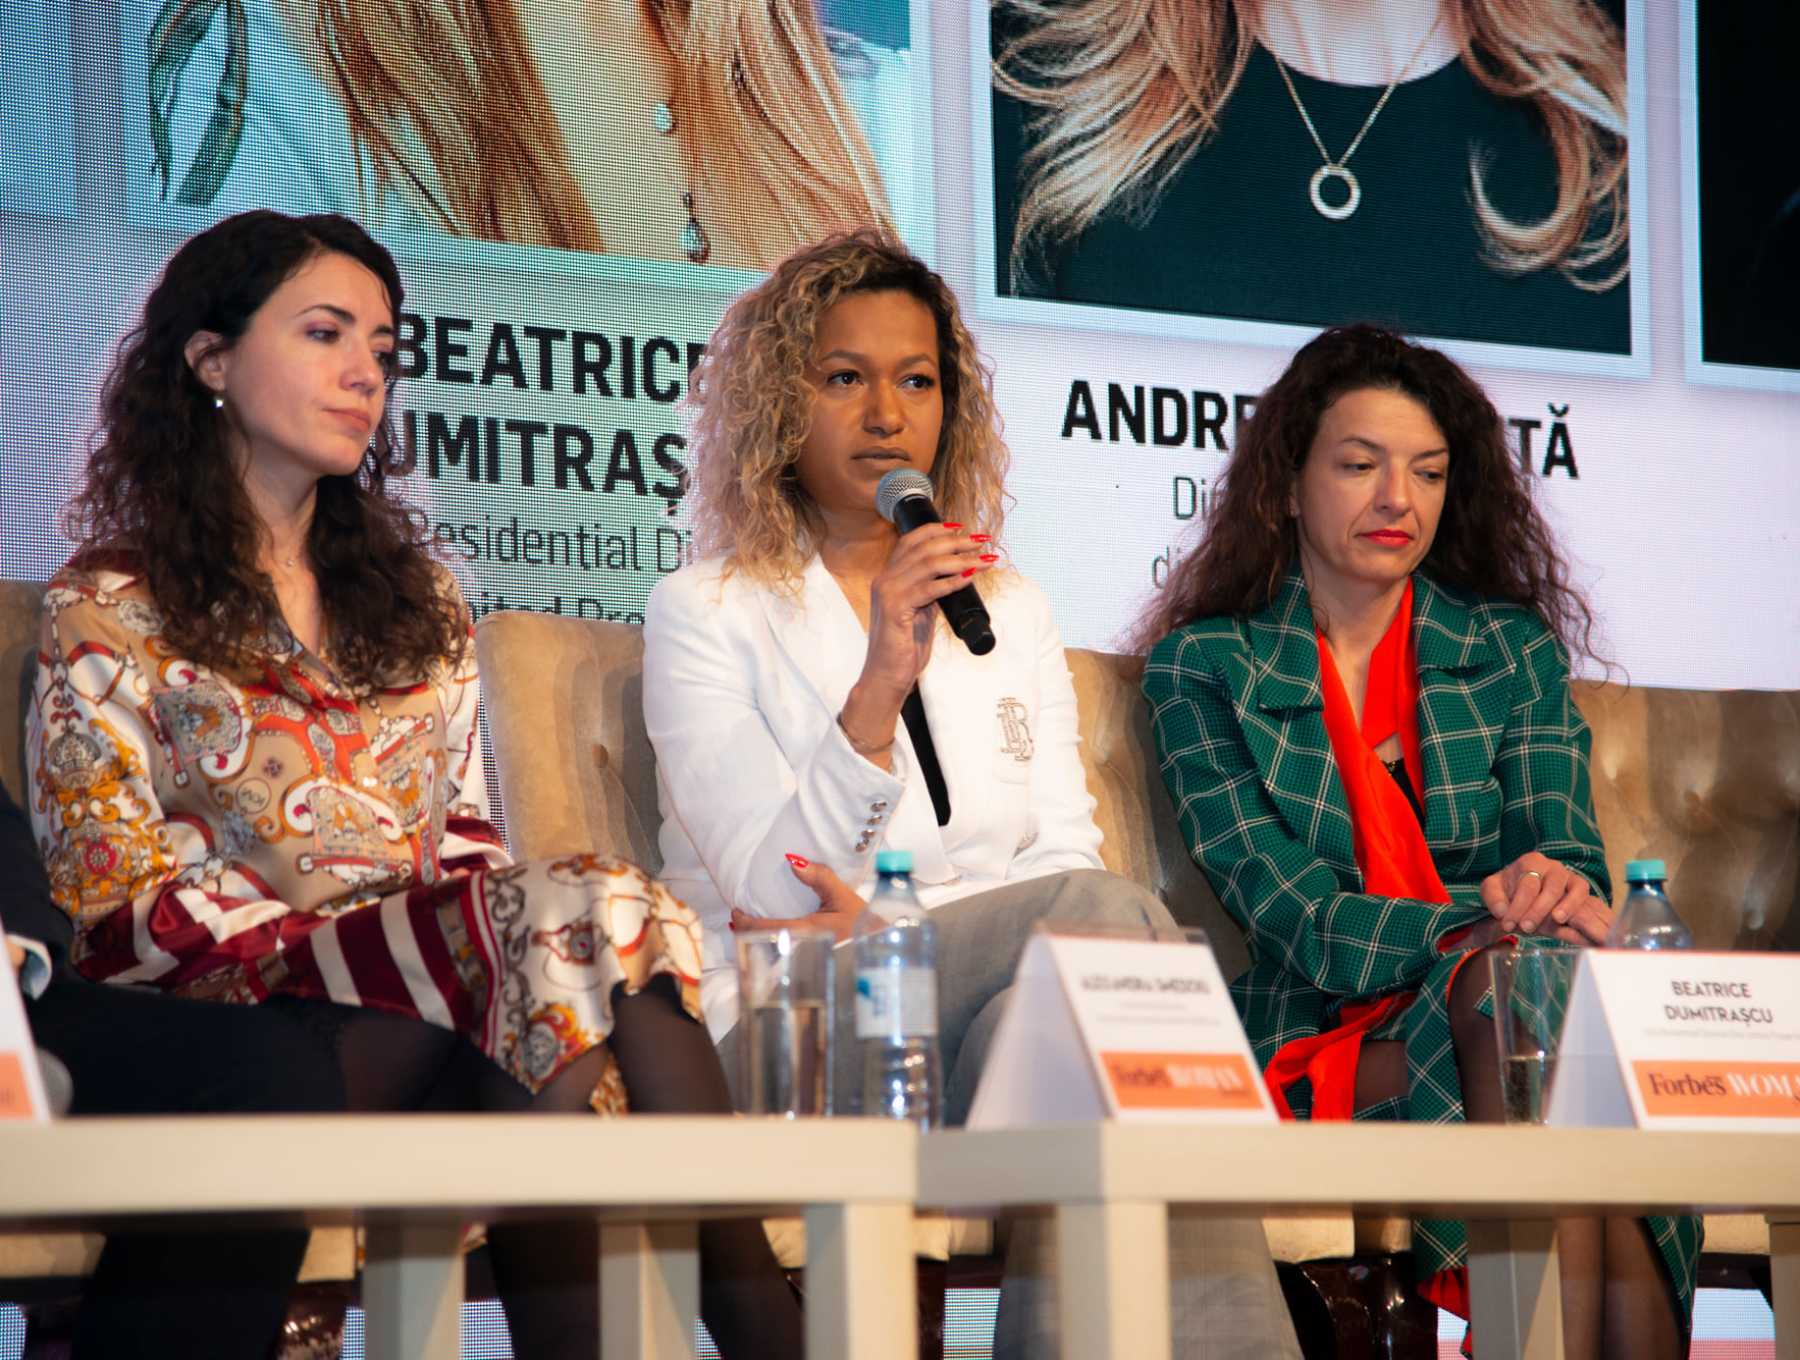 Beatrice Dumitrascu, CEO Residential Division, speaker at Forbes Woman Summit 2022